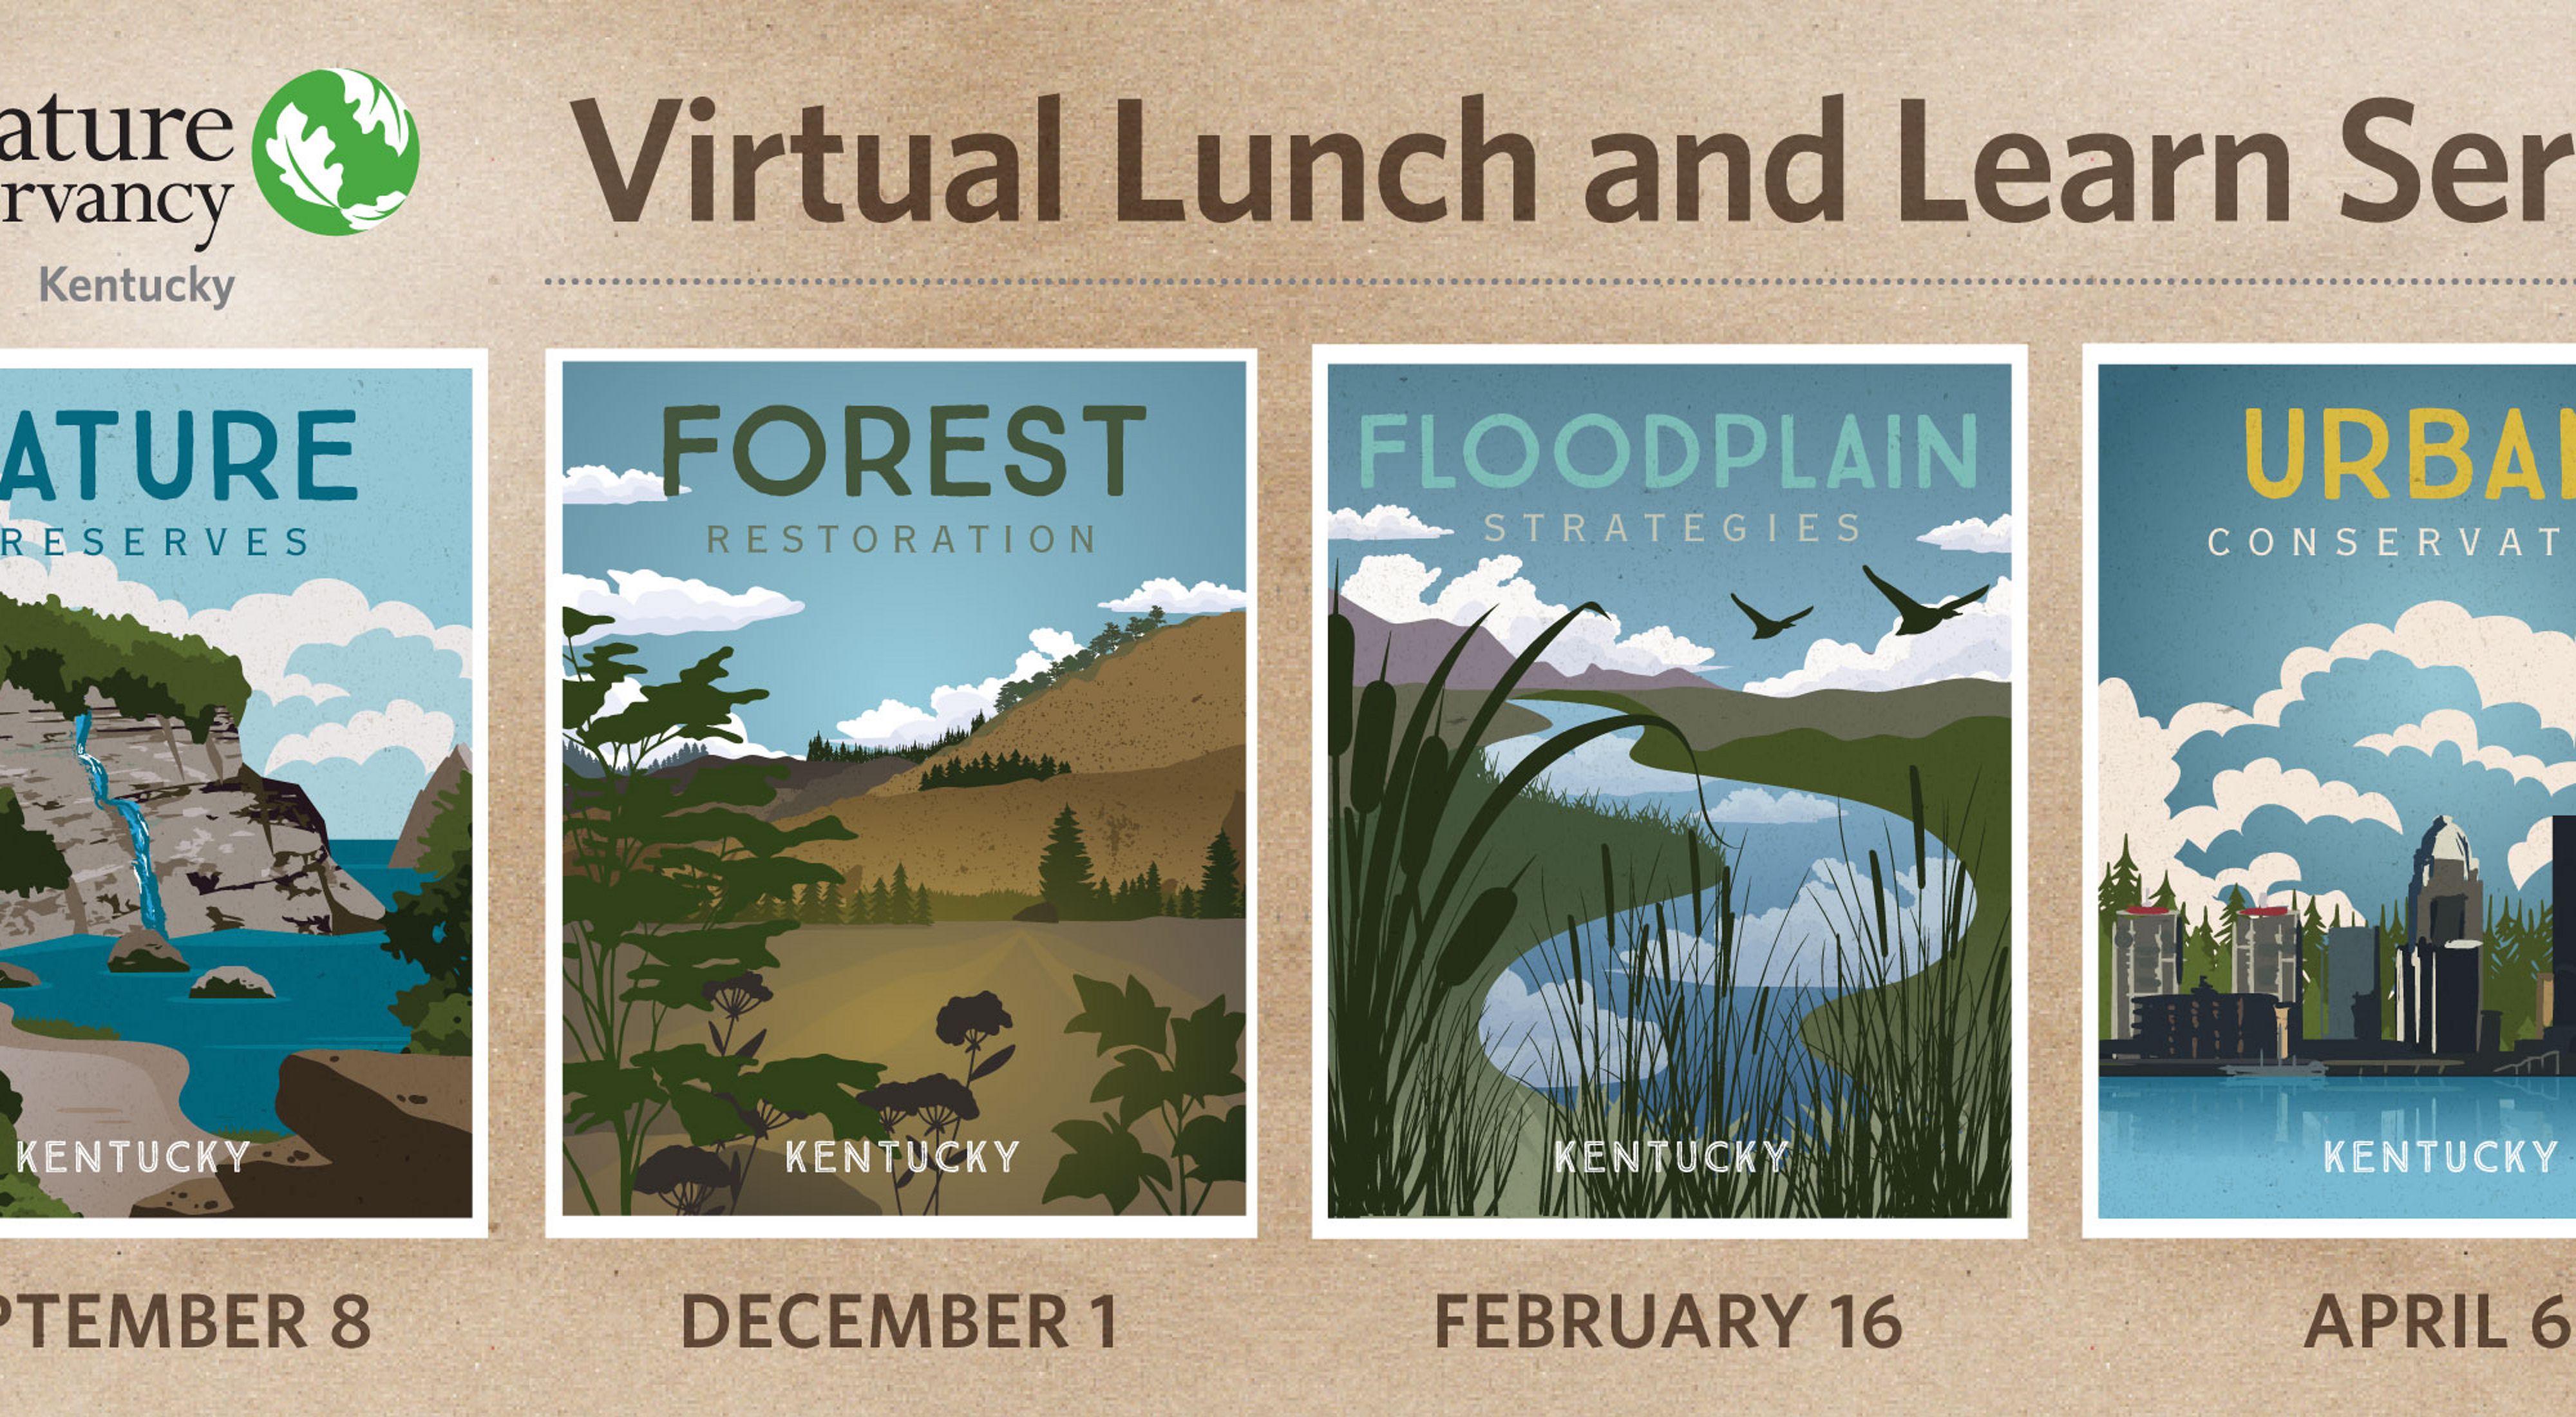 Illustrations showing subject matter of four upcoming Lunch and Learn presentations: Nature Preserves, Forest Restoration, Floodplain Strategies, and Urban Conservation.